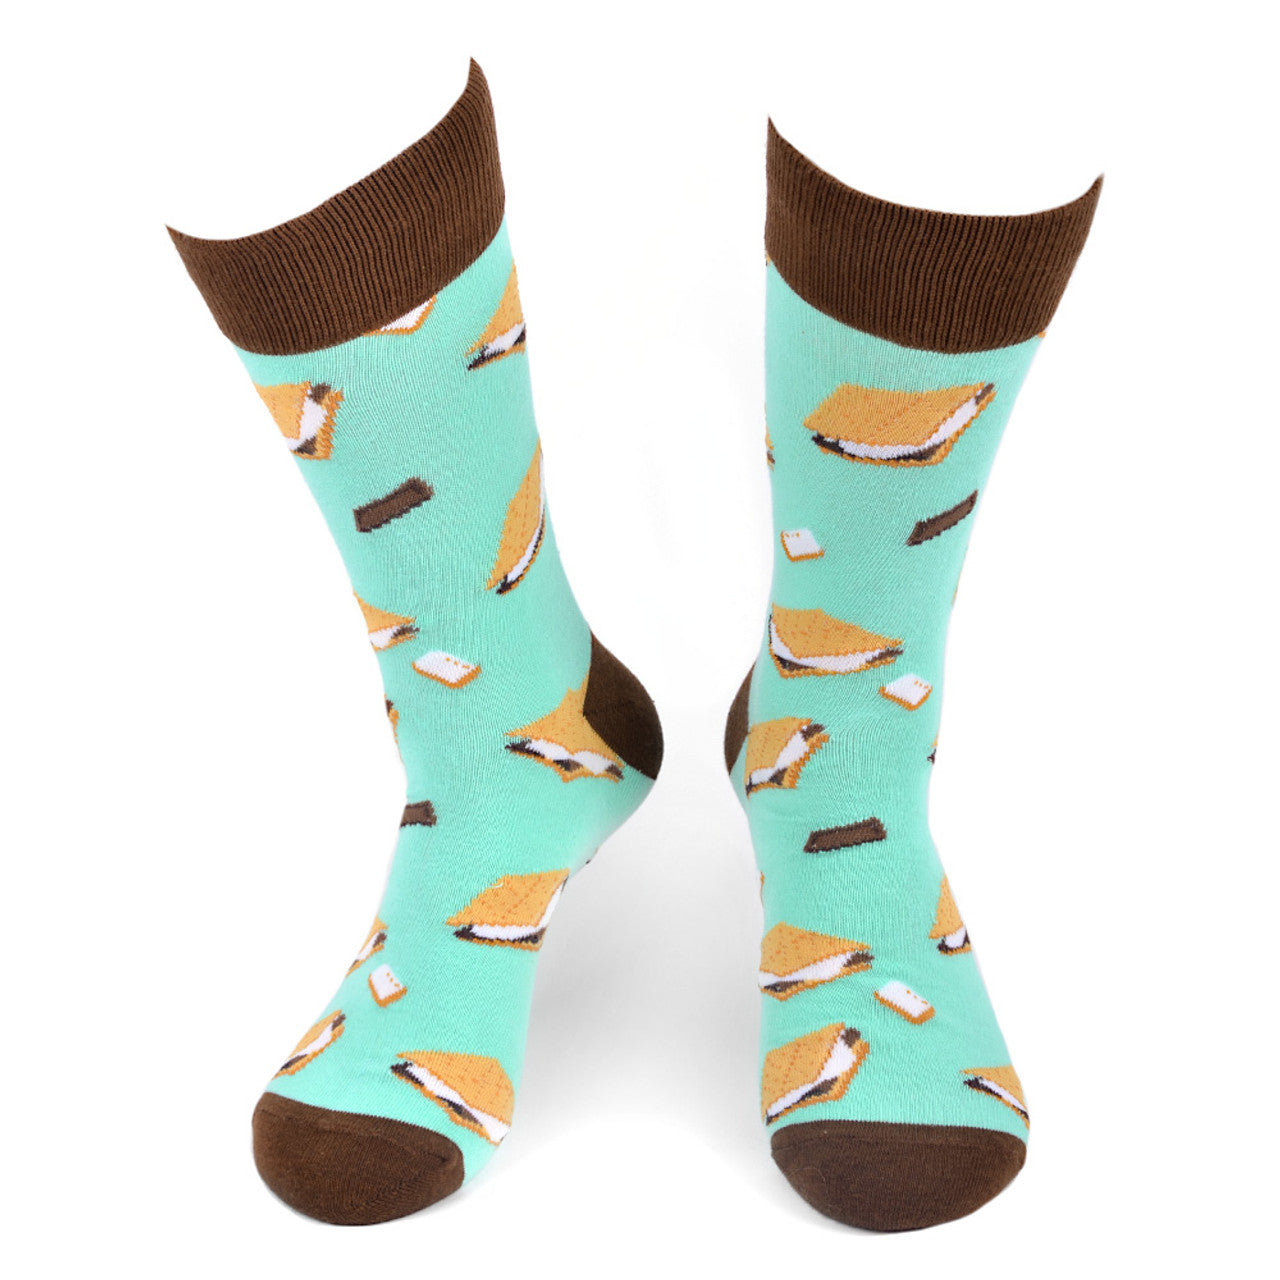 Men's S'mores Socks -  Sweet Style for Campers & Hikers!